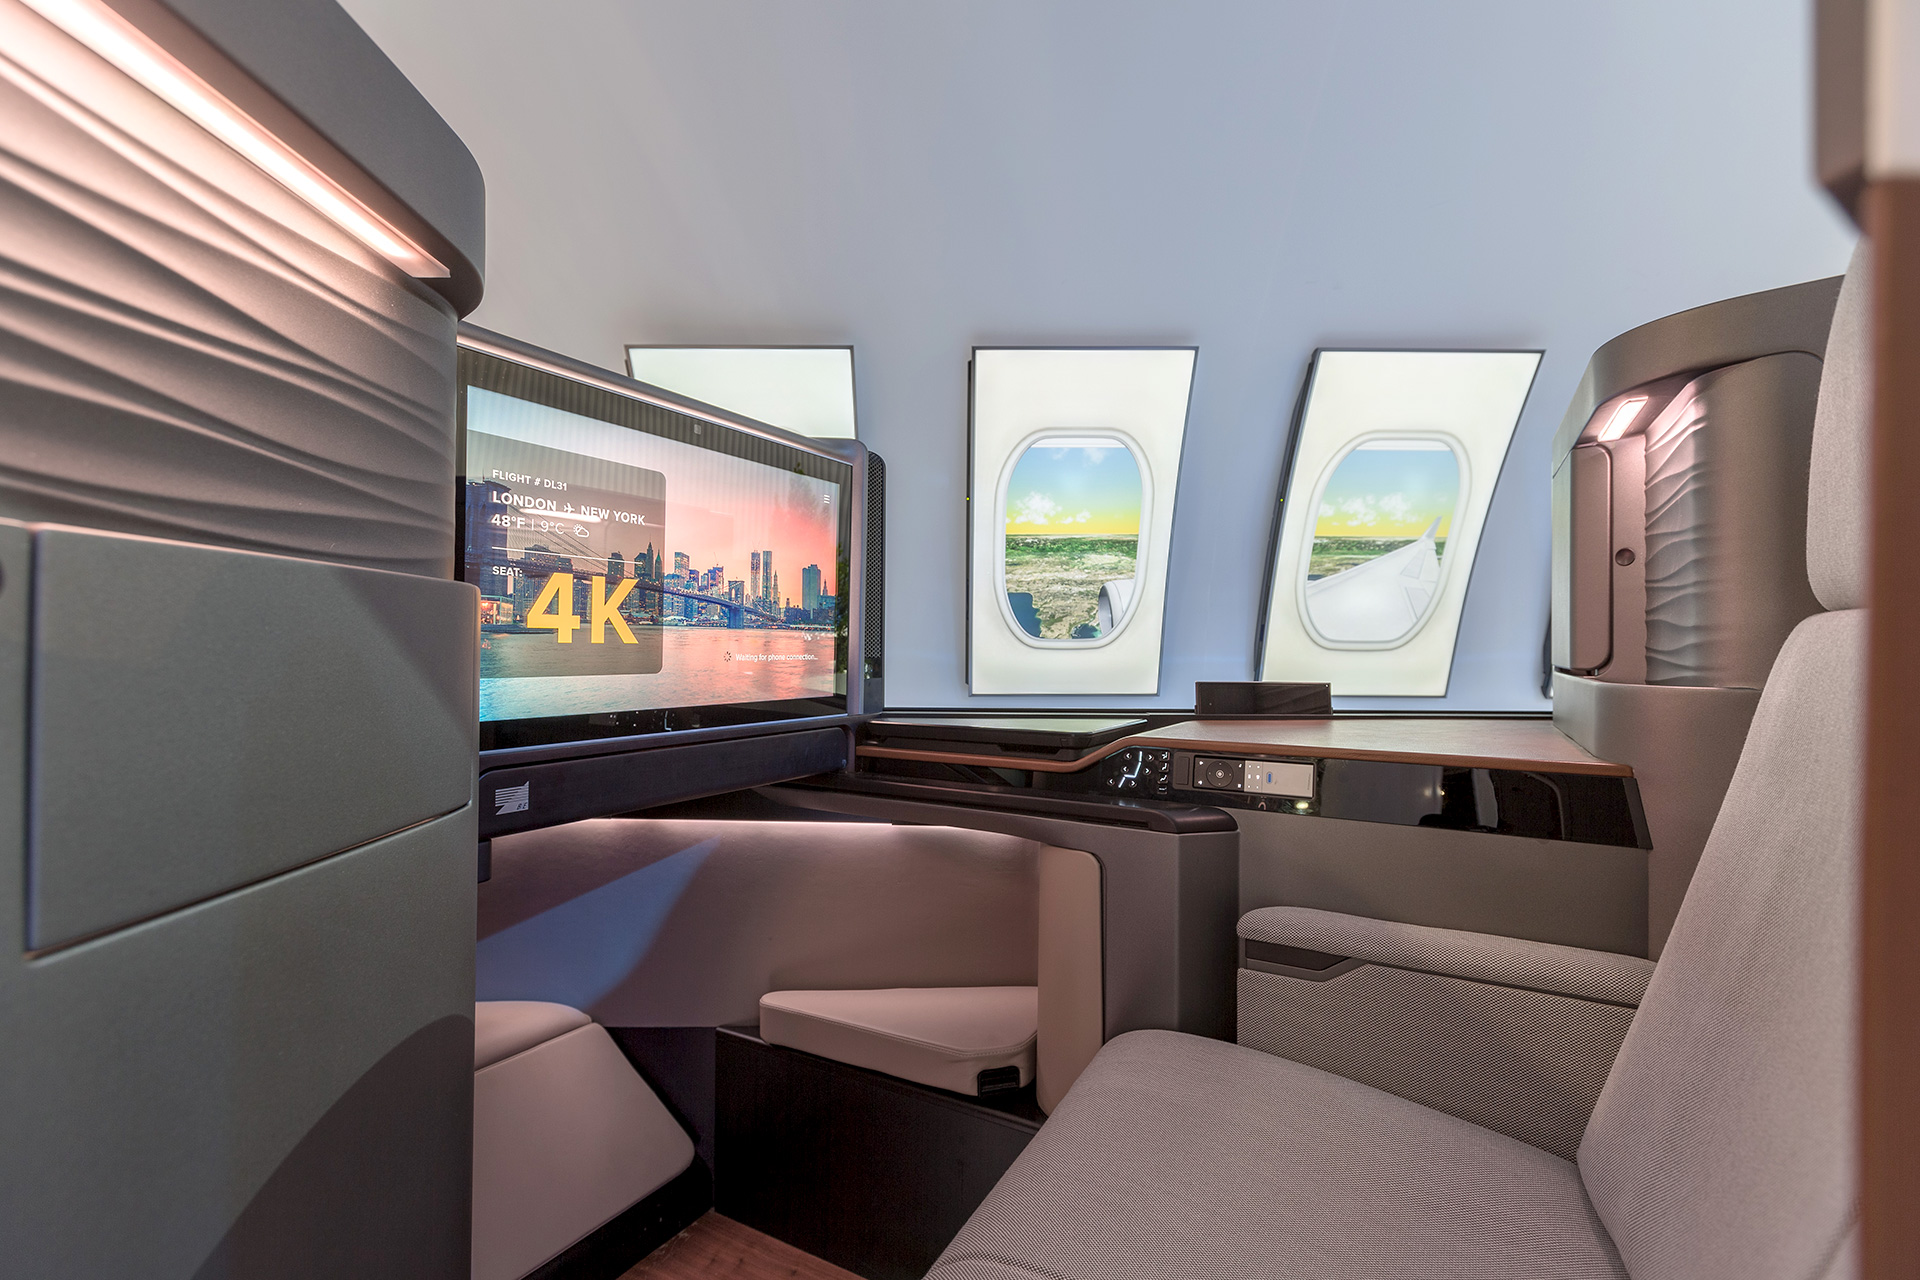 A first-class airplane cabin exhibit with a beige fabric seat and video screen in the foreground an video screen emulating airplane windows in the background.